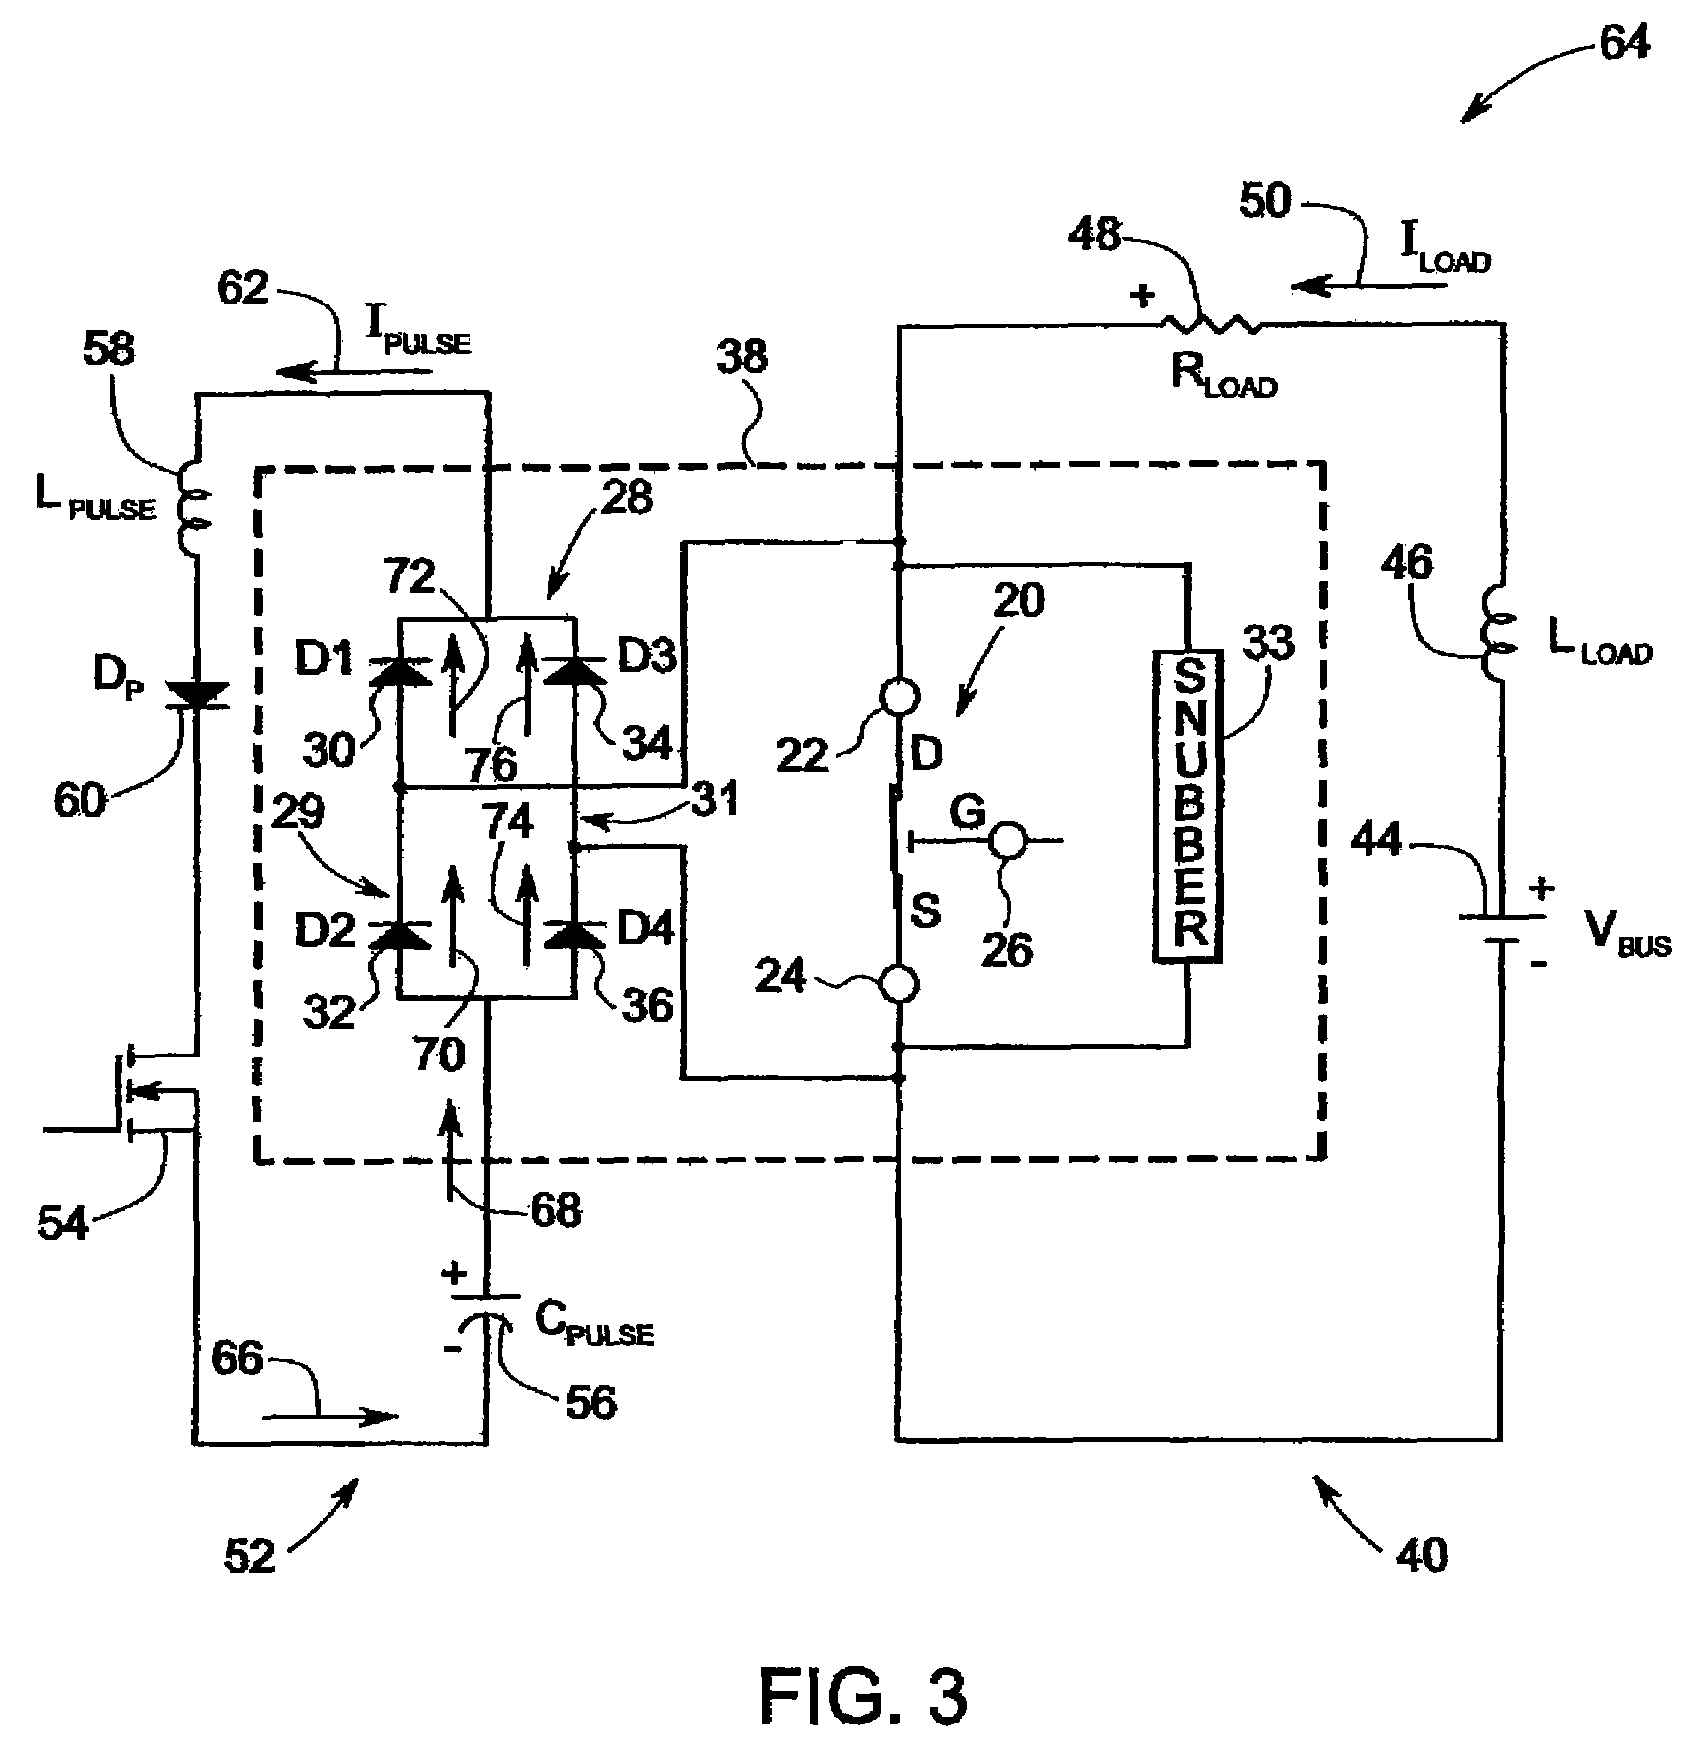 Electromechanical switching circuitry in parallel with solid state switching circuitry selectively switchable to carry a load appropriate to such circuitry